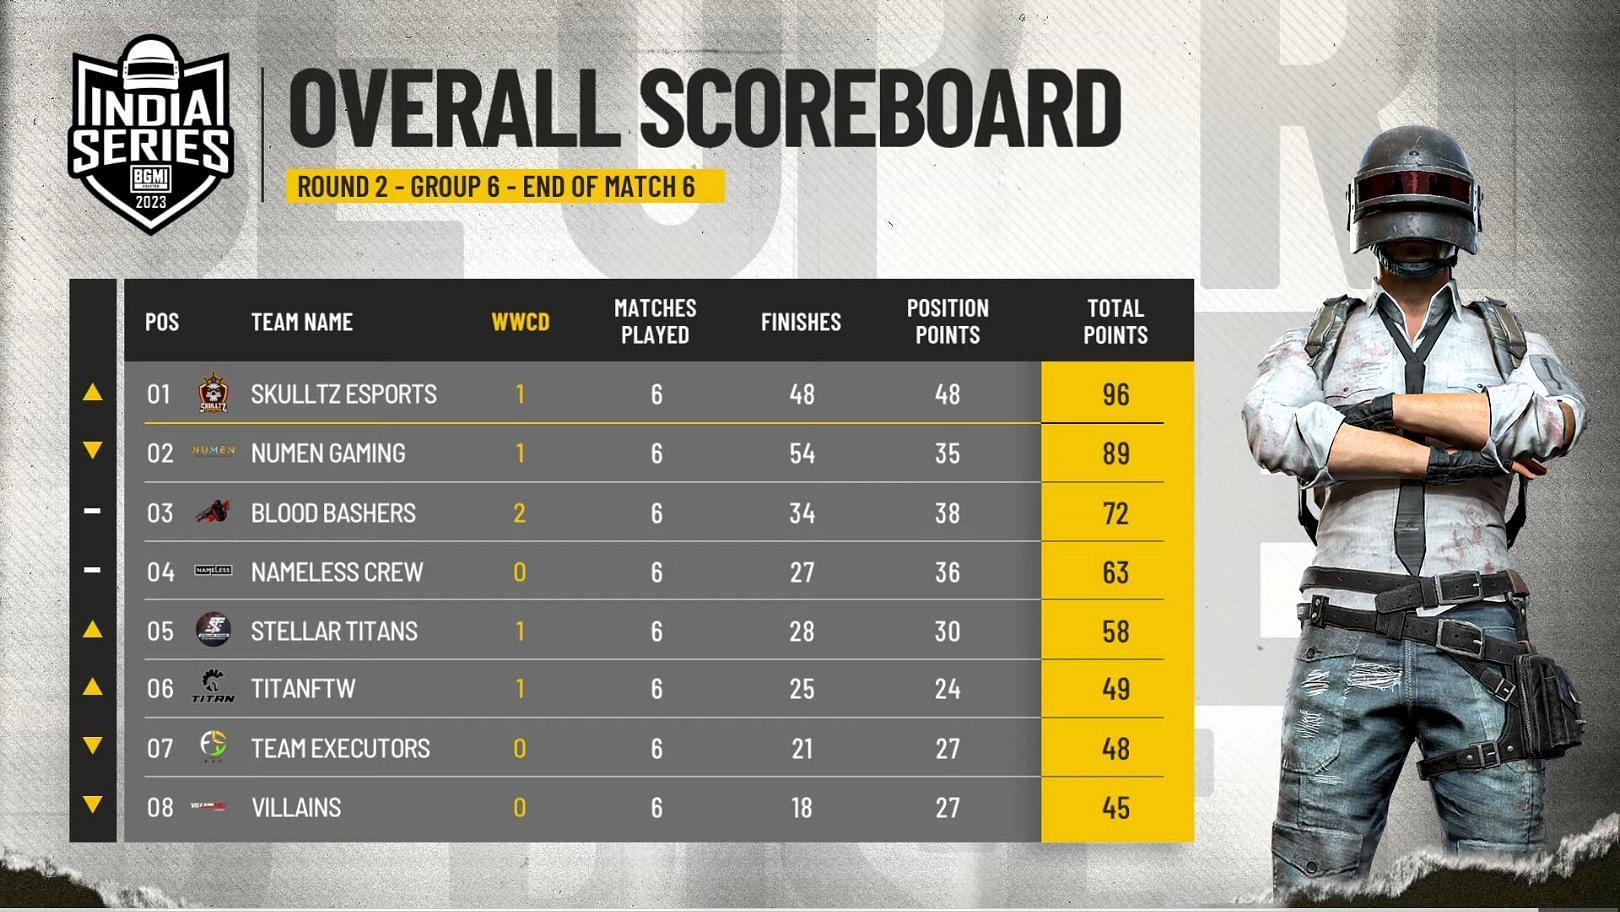 Numen Gaming registered second position in Group 6 (Image via BGMI)